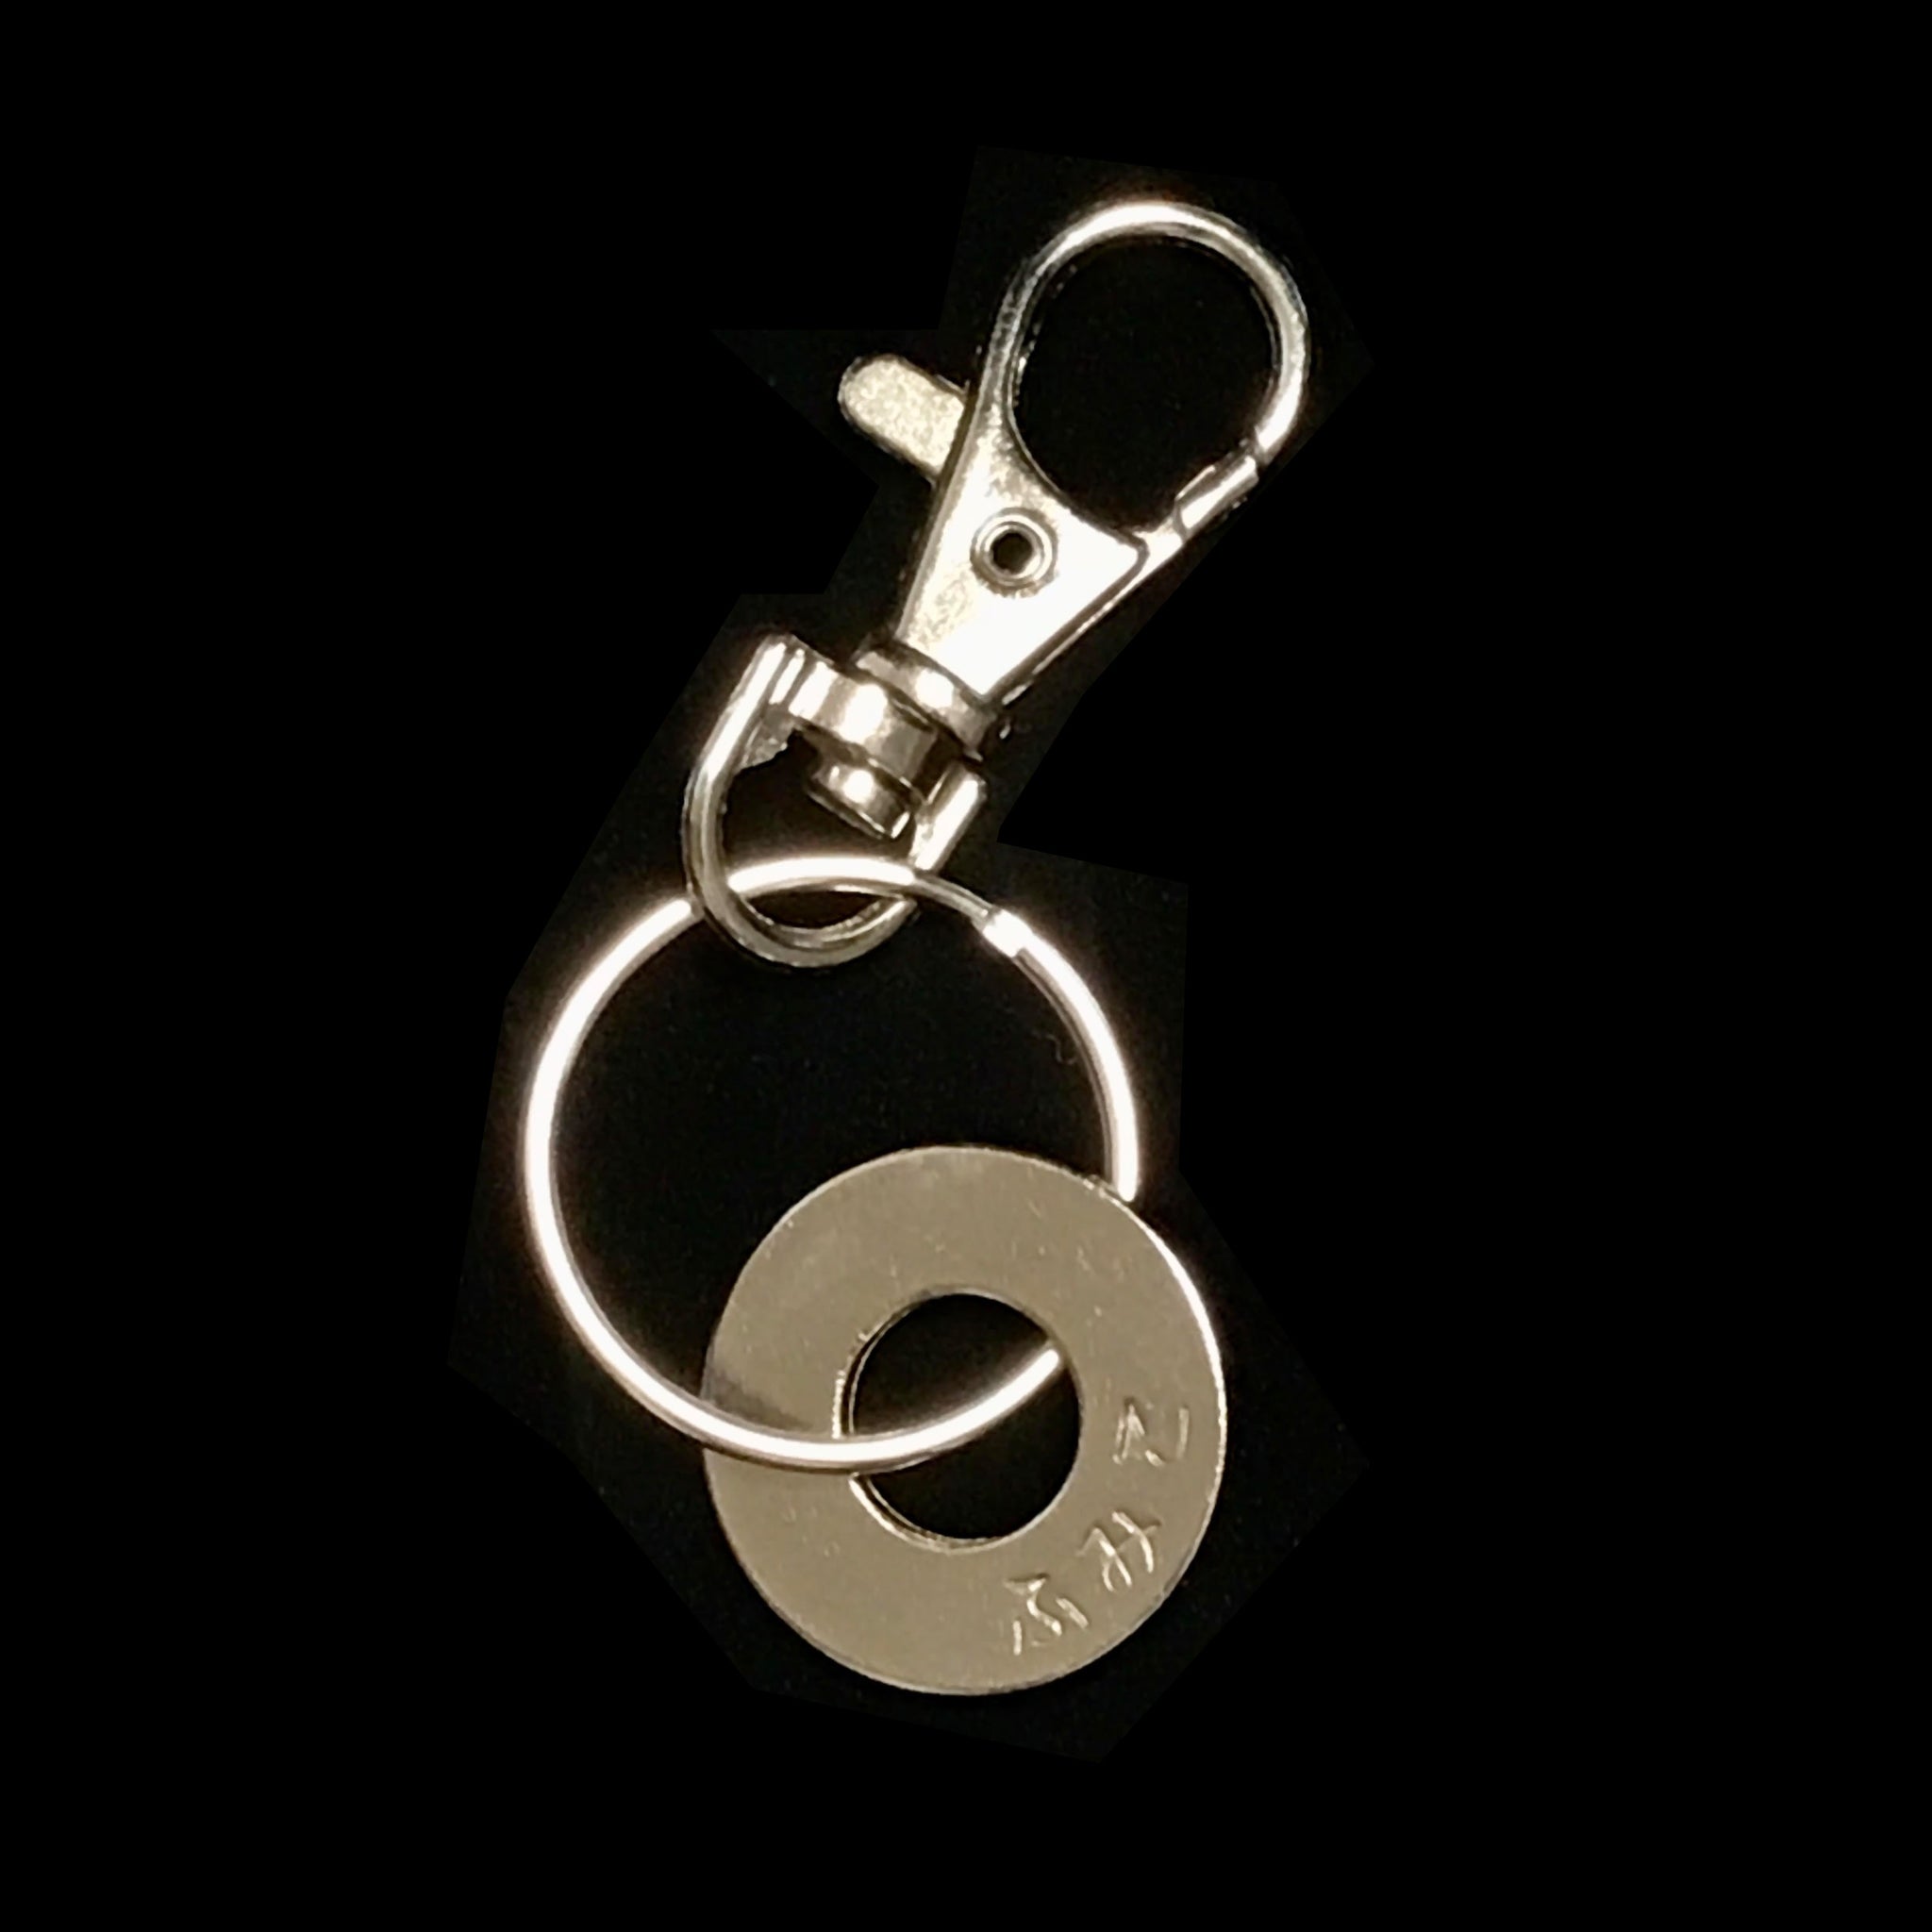 Personalized hand-stamped NICKEL keychain - in English or Japanese (hiragana)